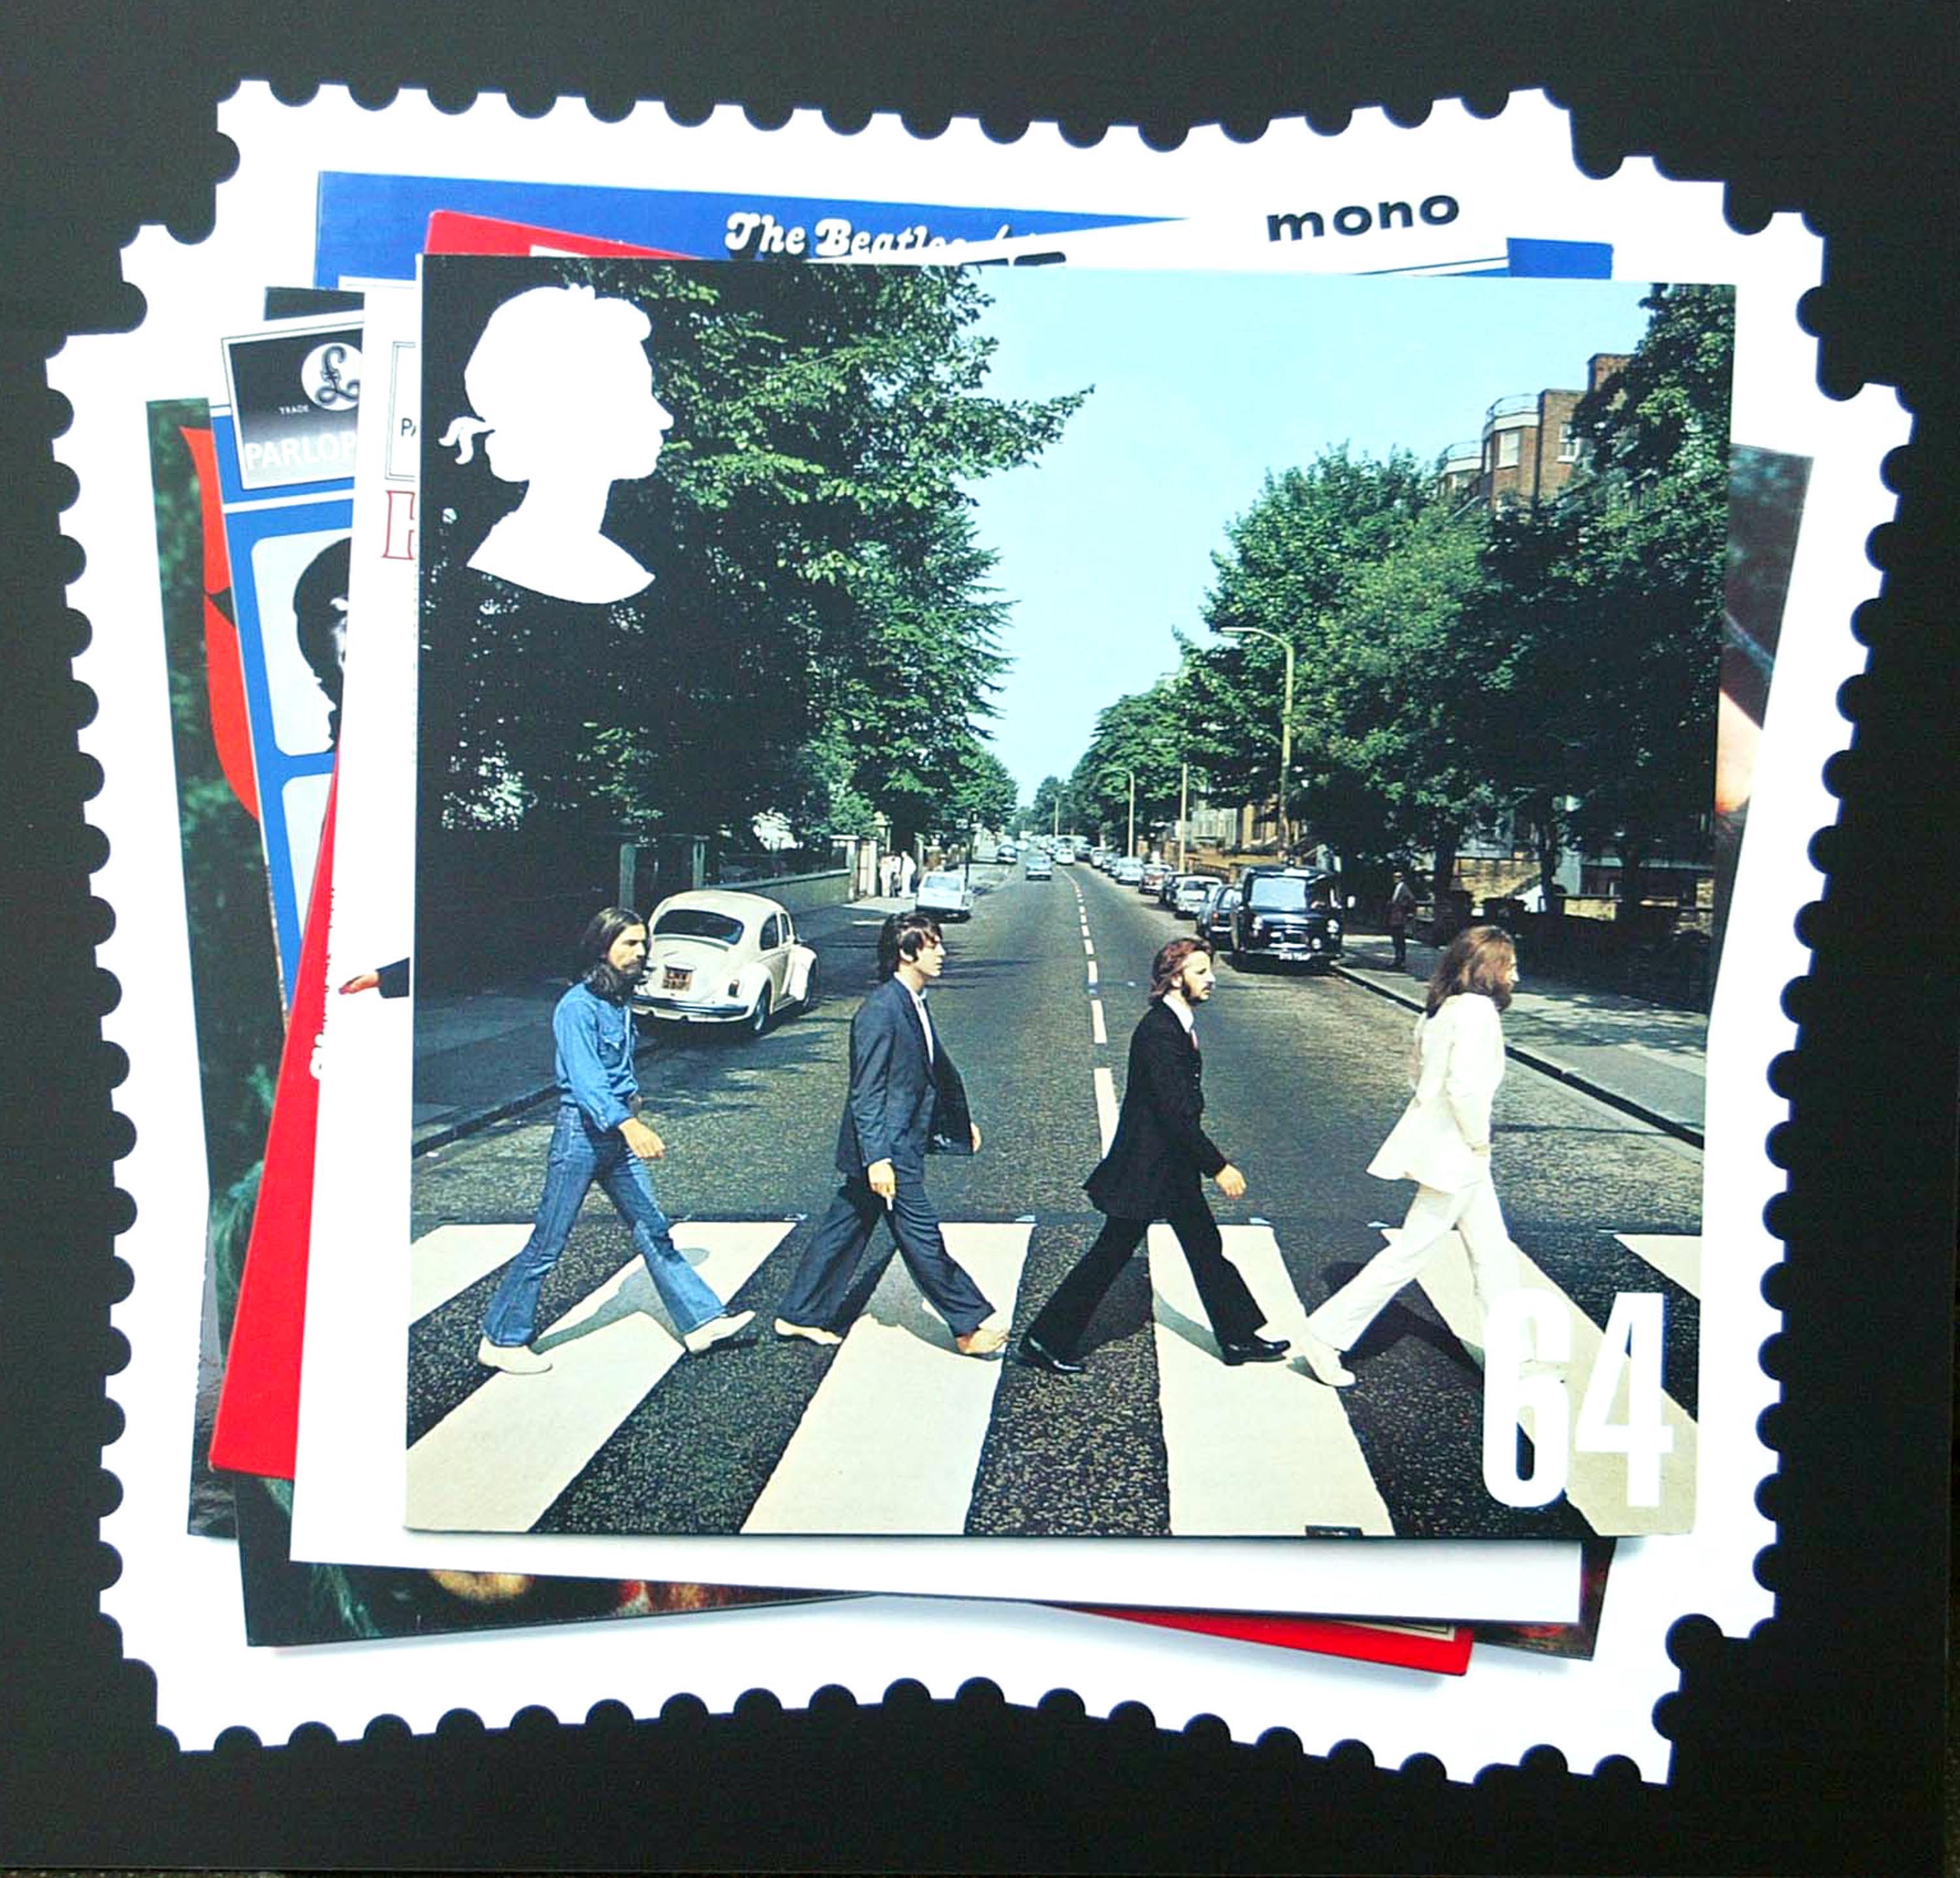 Royal Mail stamps feature The Beatles at Abbey Road studios